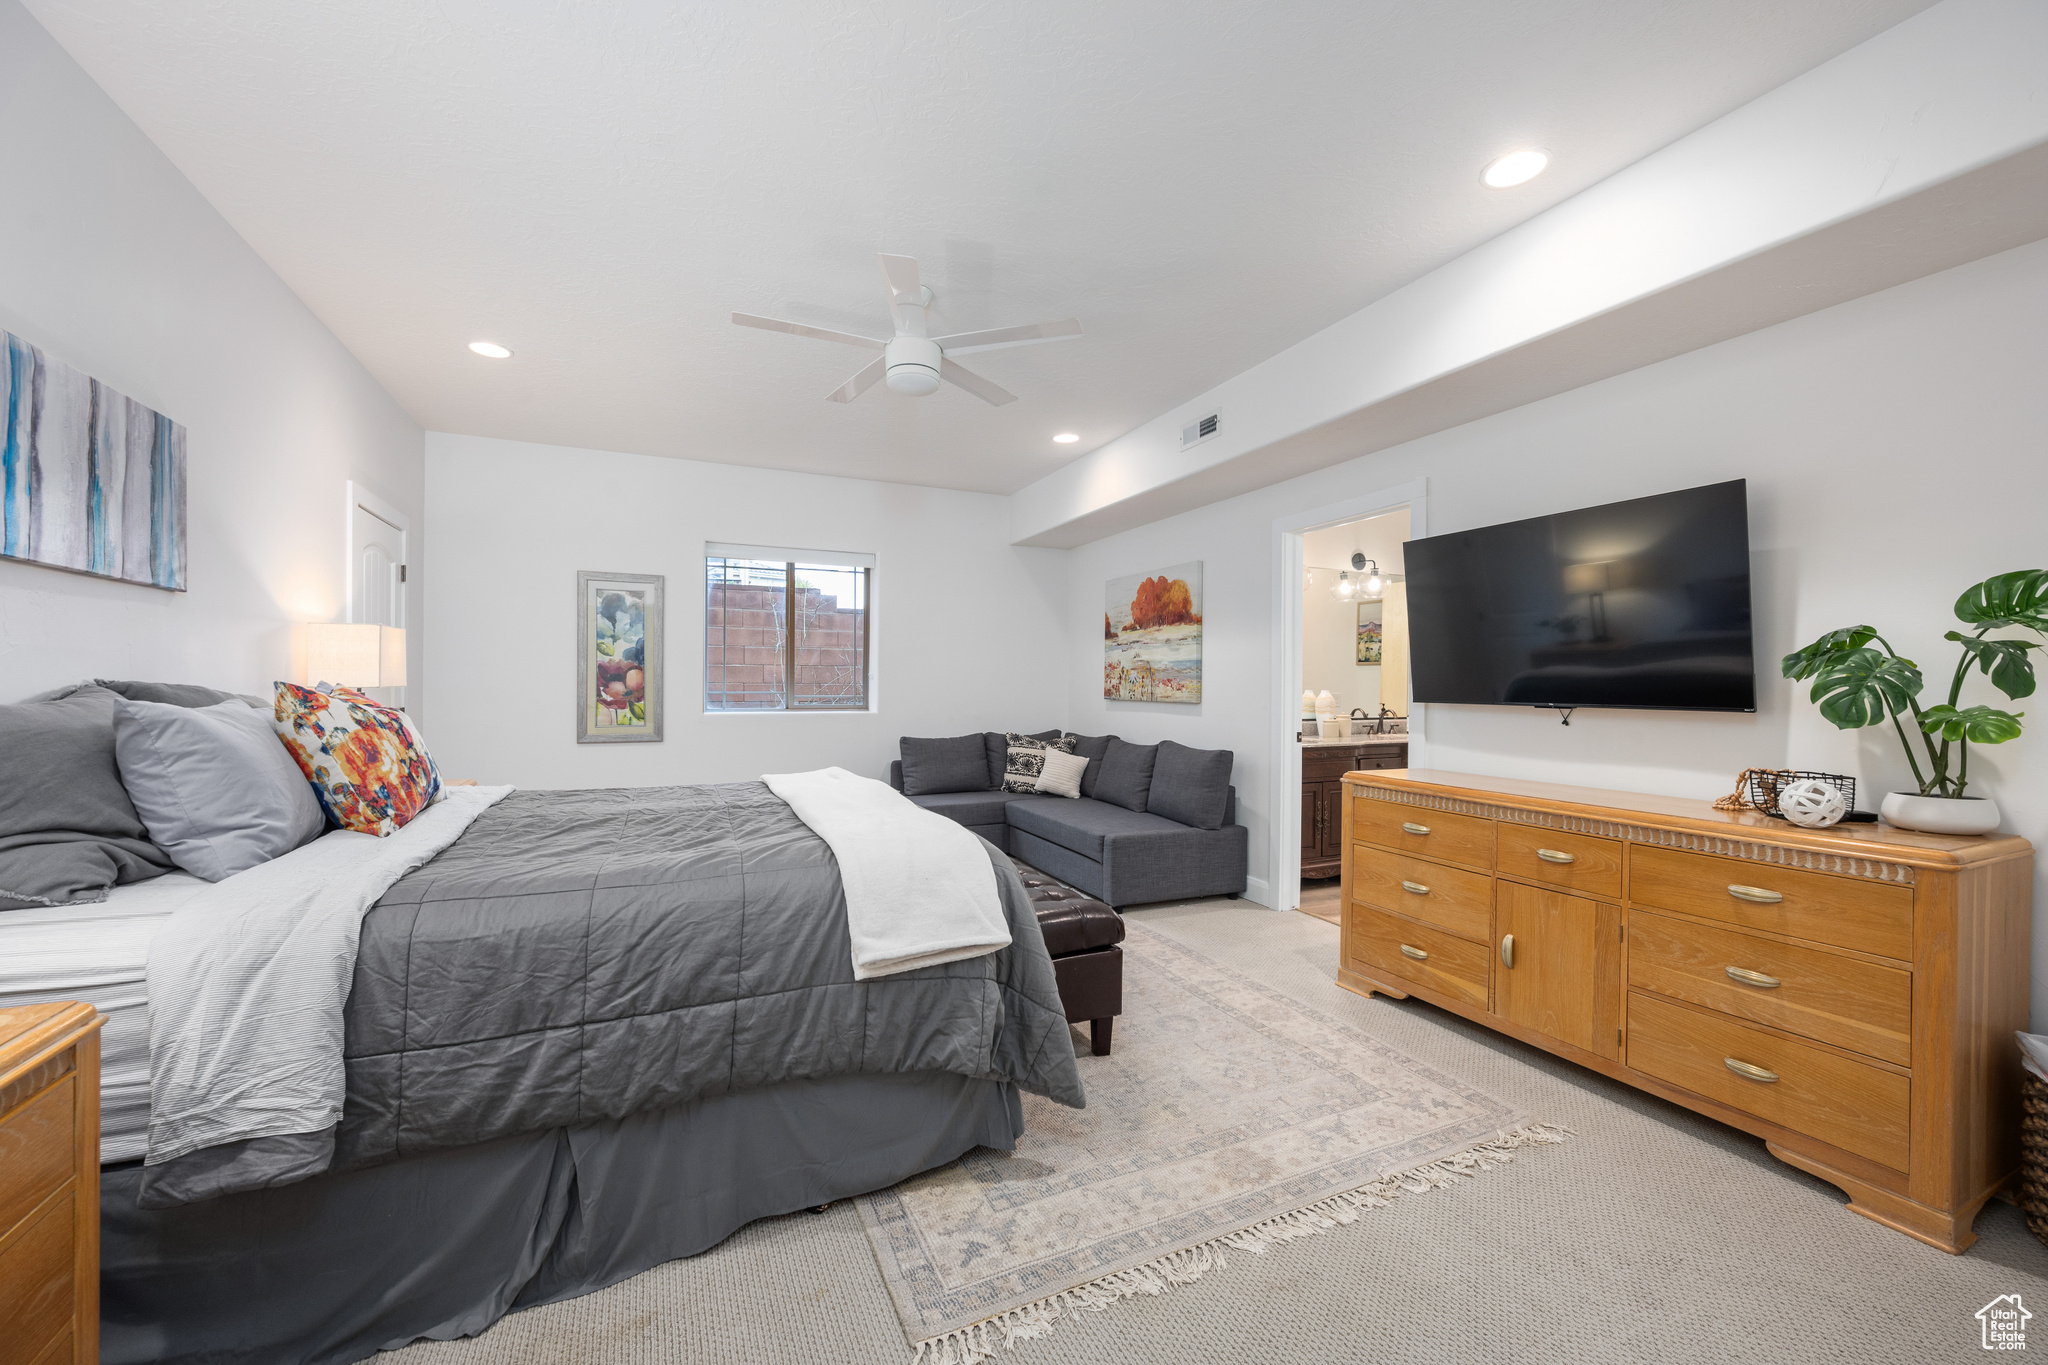 Carpeted bedroom with ceiling fan and connected bathroom